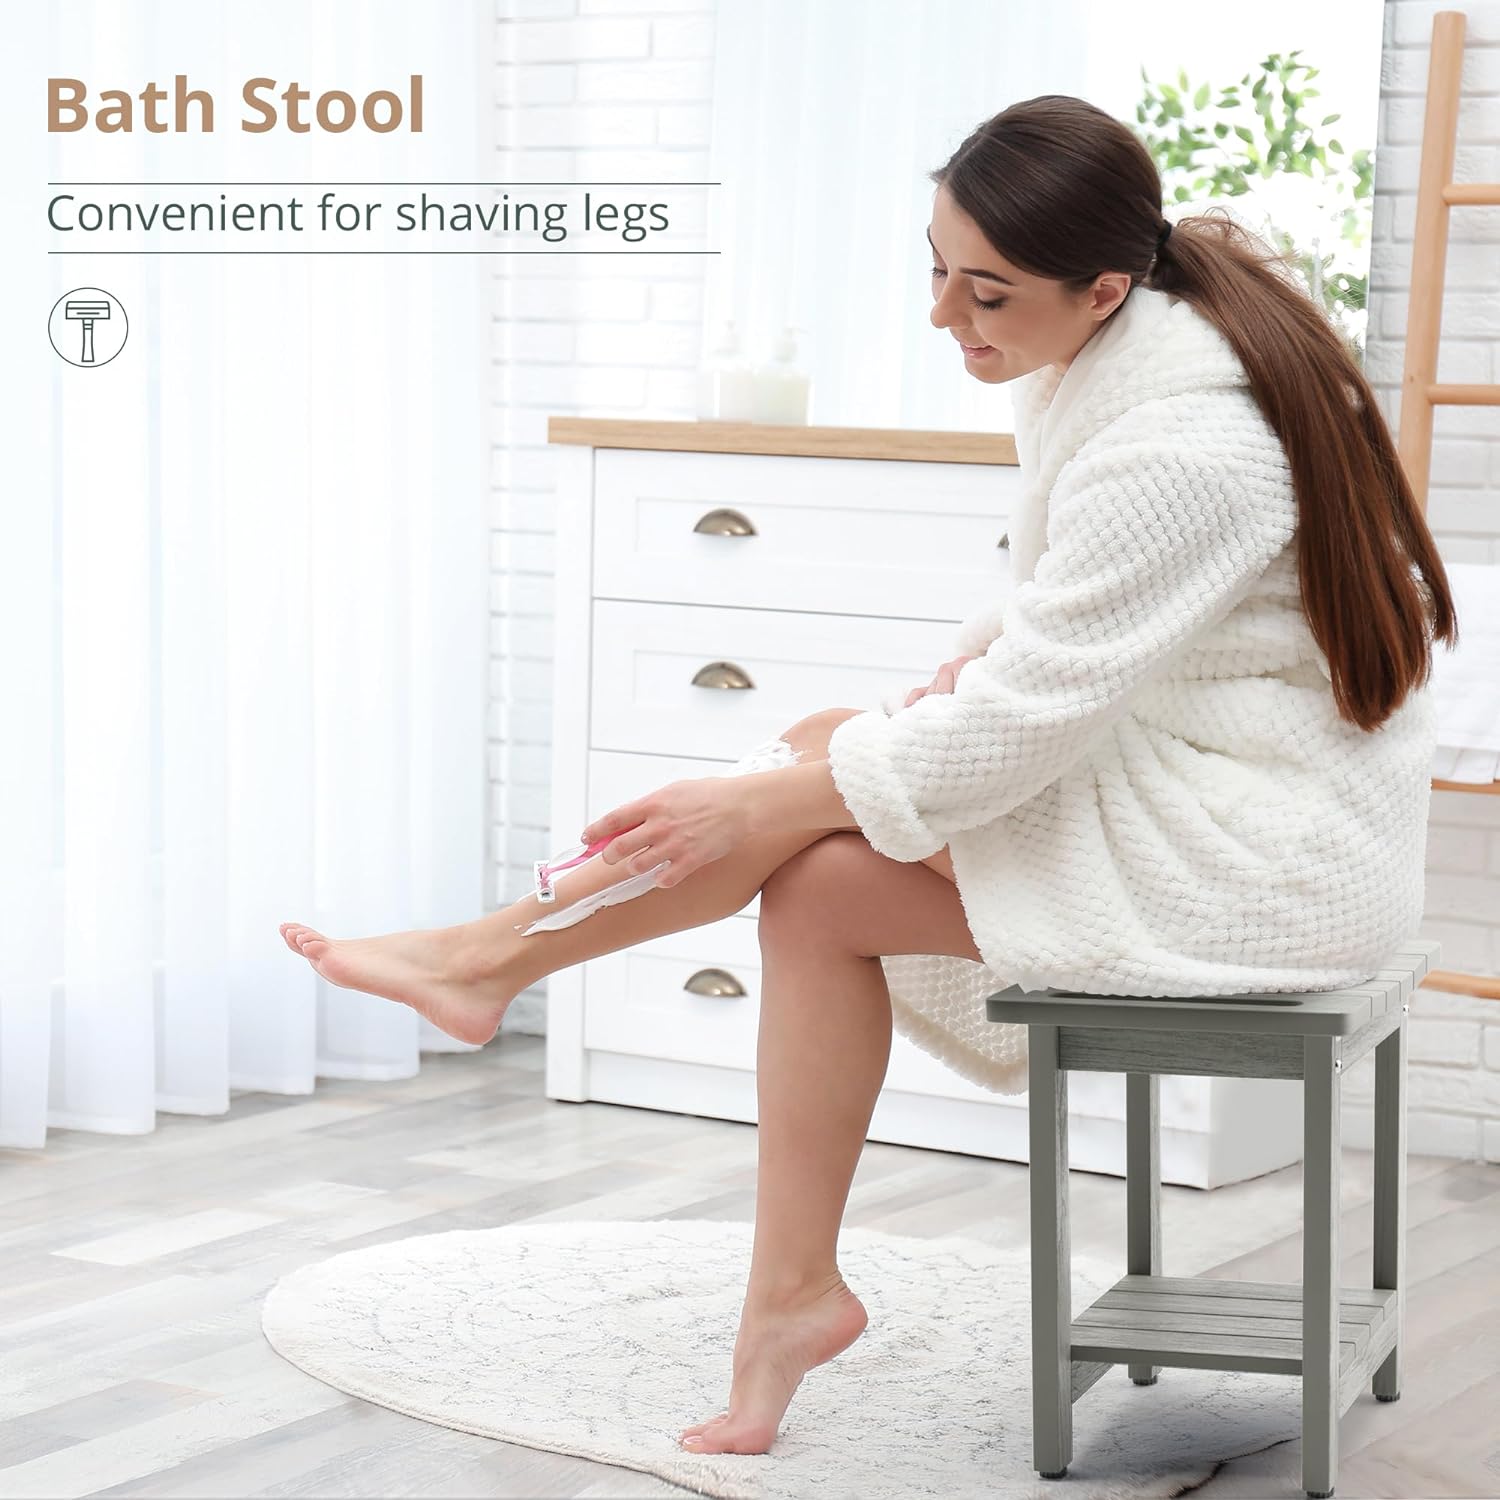 Shower Benches for Inside Shower, Gray Shower Stool for Shaving Legs with Shelf, Waterproof Shower Chair Seat